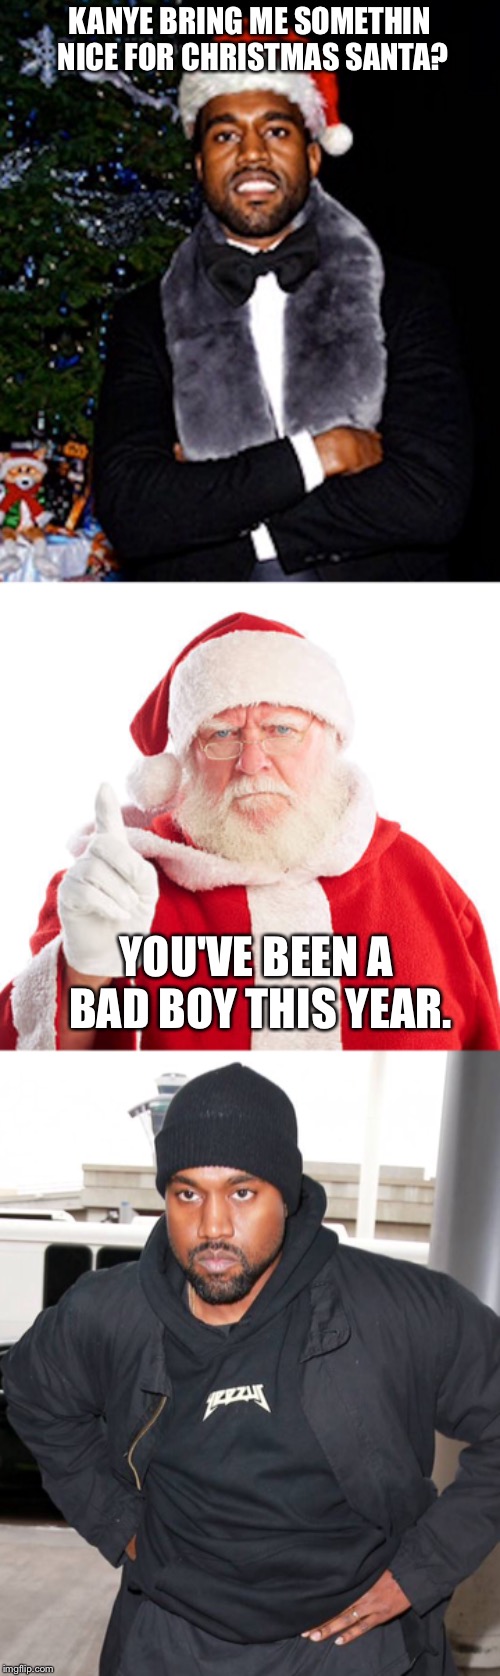 But It's Christmas!   | KANYE BRING ME SOMETHIN NICE FOR CHRISTMAS SANTA? YOU'VE BEEN A BAD BOY THIS YEAR. | image tagged in kanye,santa,christmas | made w/ Imgflip meme maker